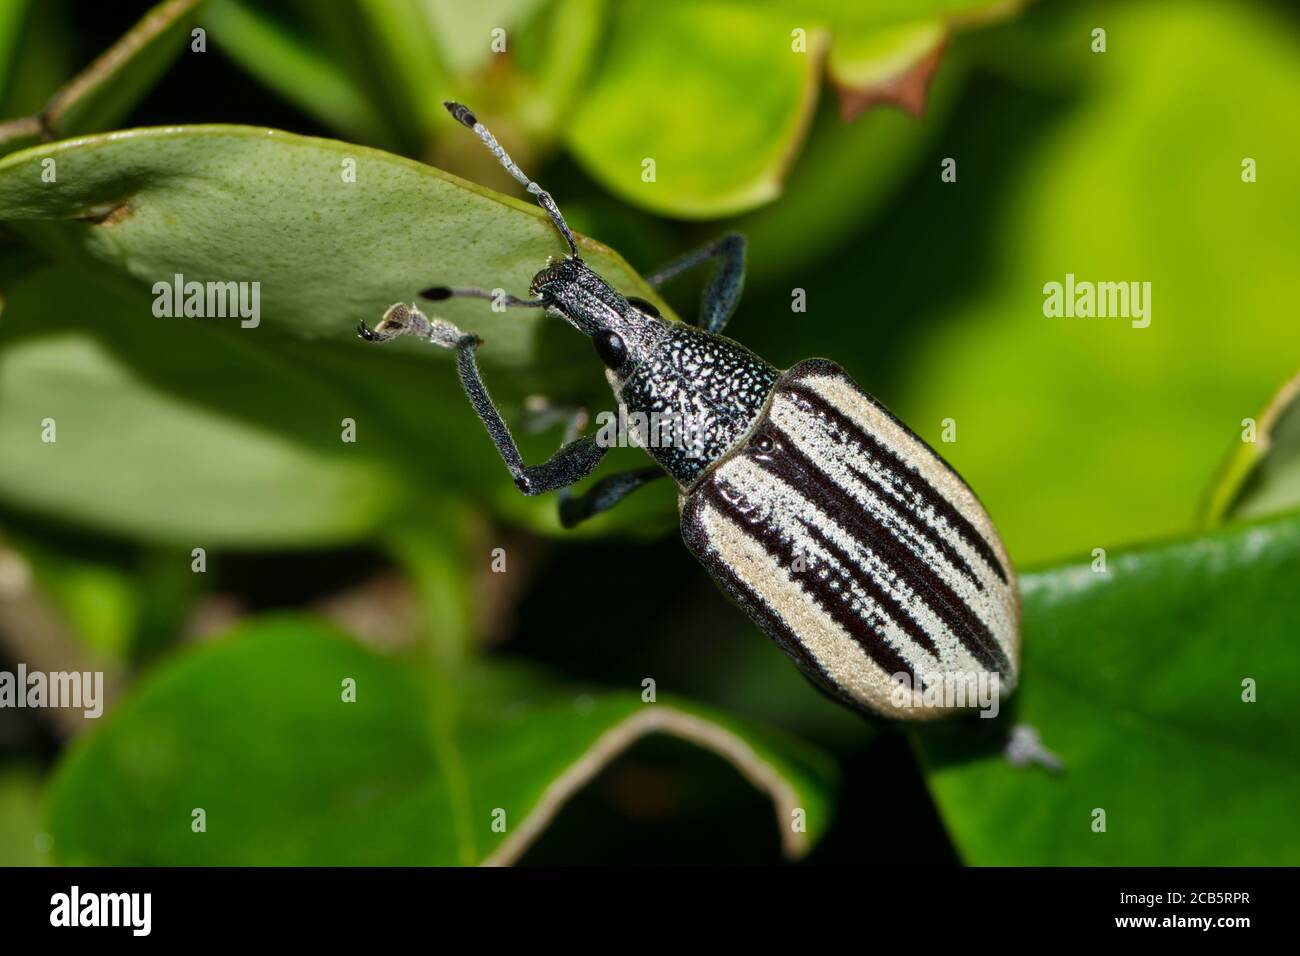 Diaprepes Root Weevil crawling through lush foliage in Houston, TX. A destructive insect that can damage many types of crops, especially citrus. Stock Photo